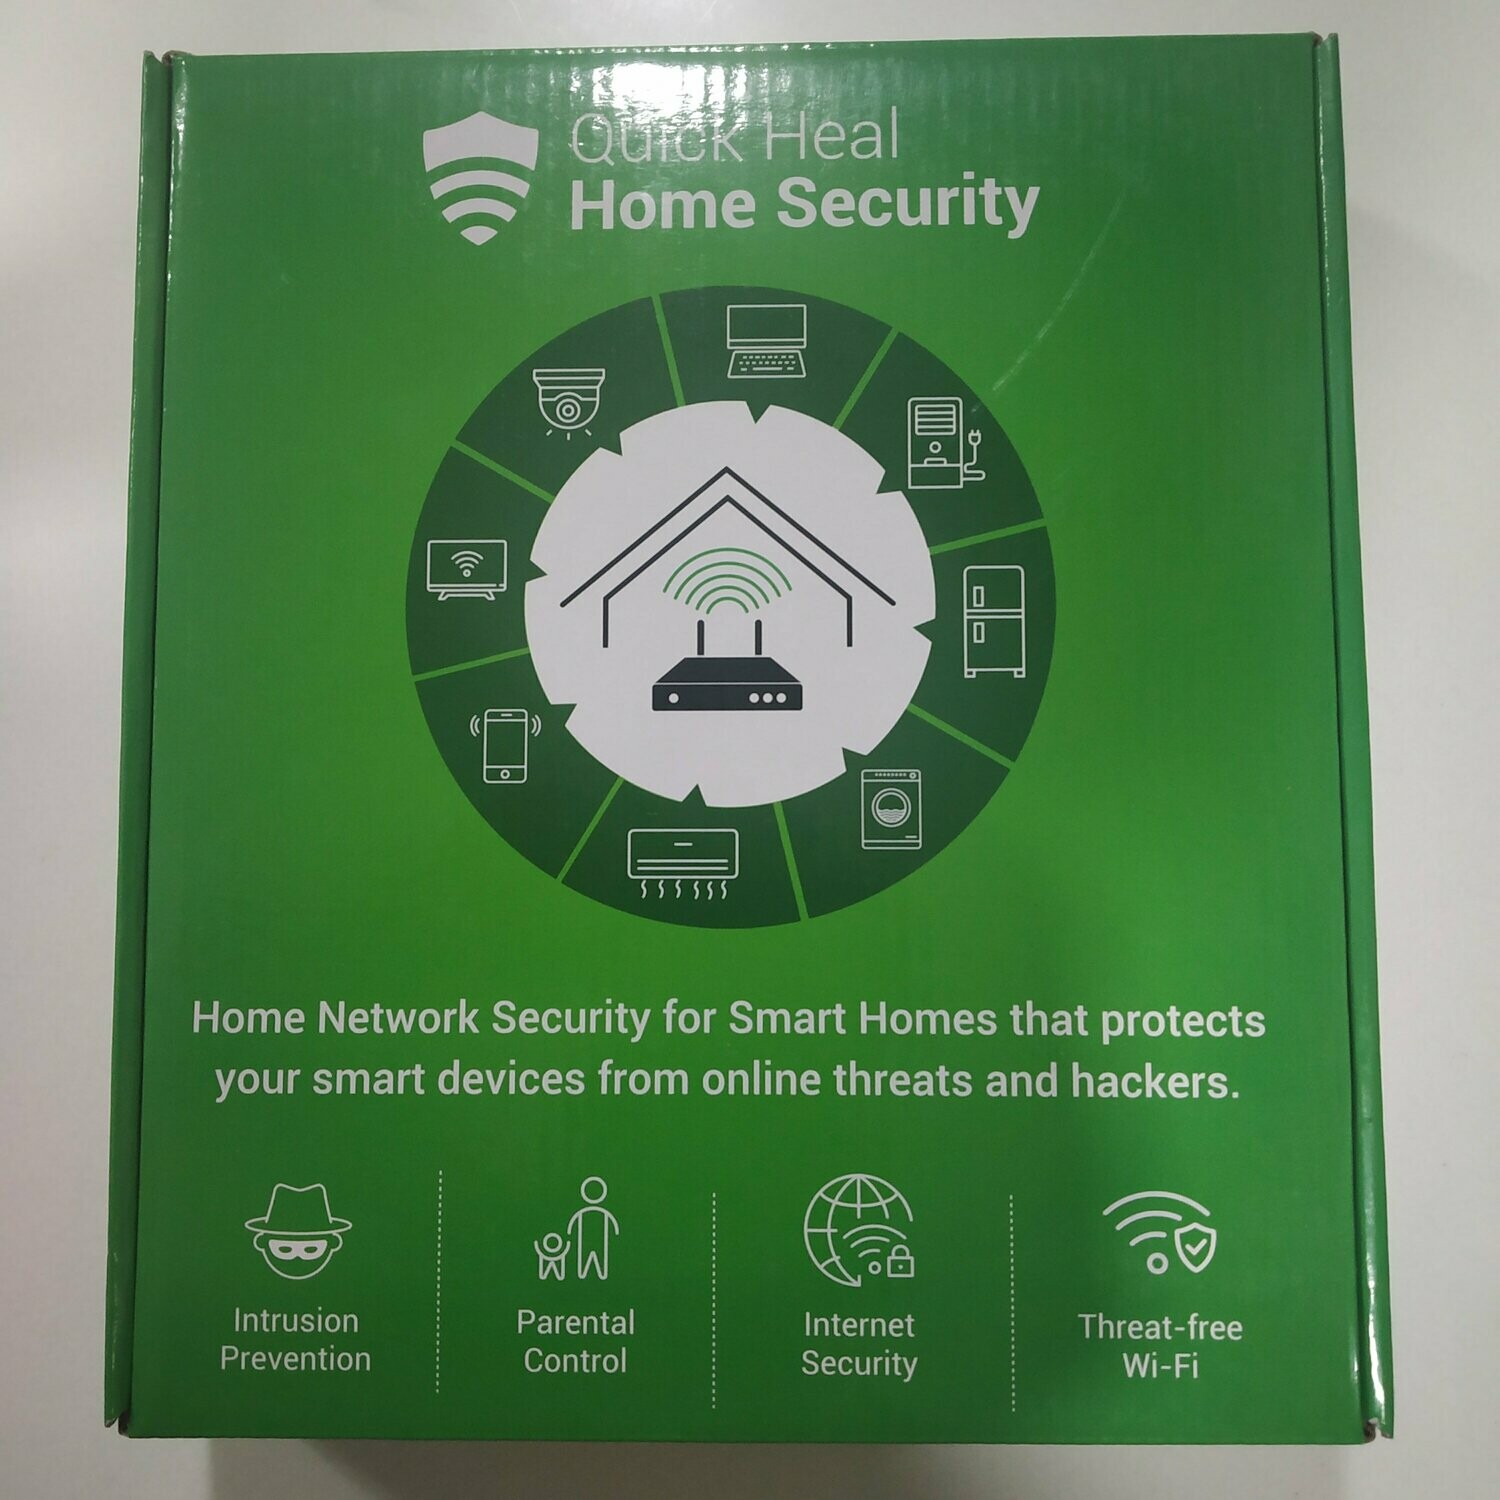 20 User, 1 Year, Quick Heal Home Network Security